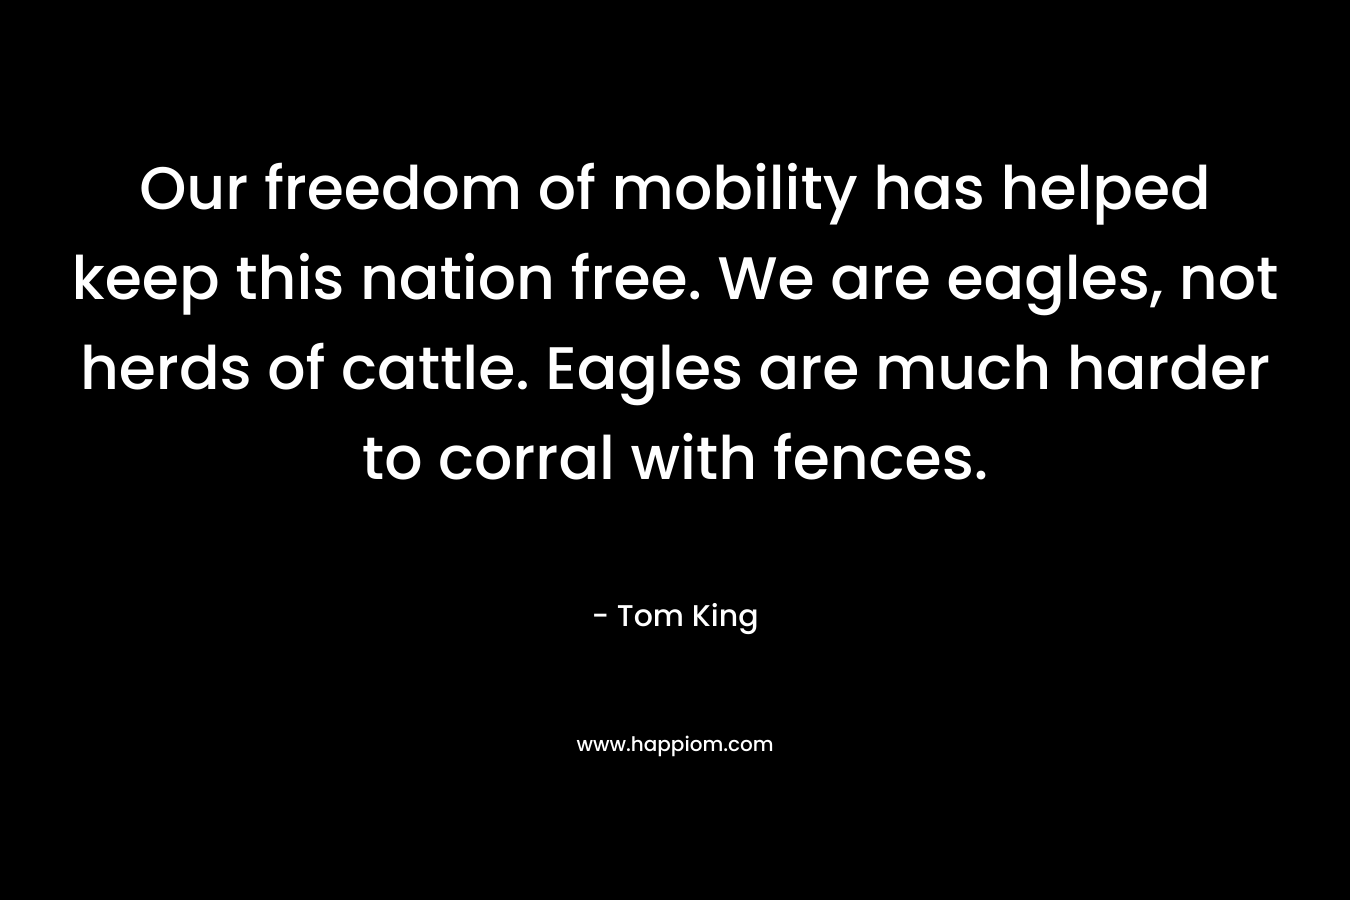 Our freedom of mobility has helped keep this nation free. We are eagles, not herds of cattle. Eagles are much harder to corral with fences. – Tom   King